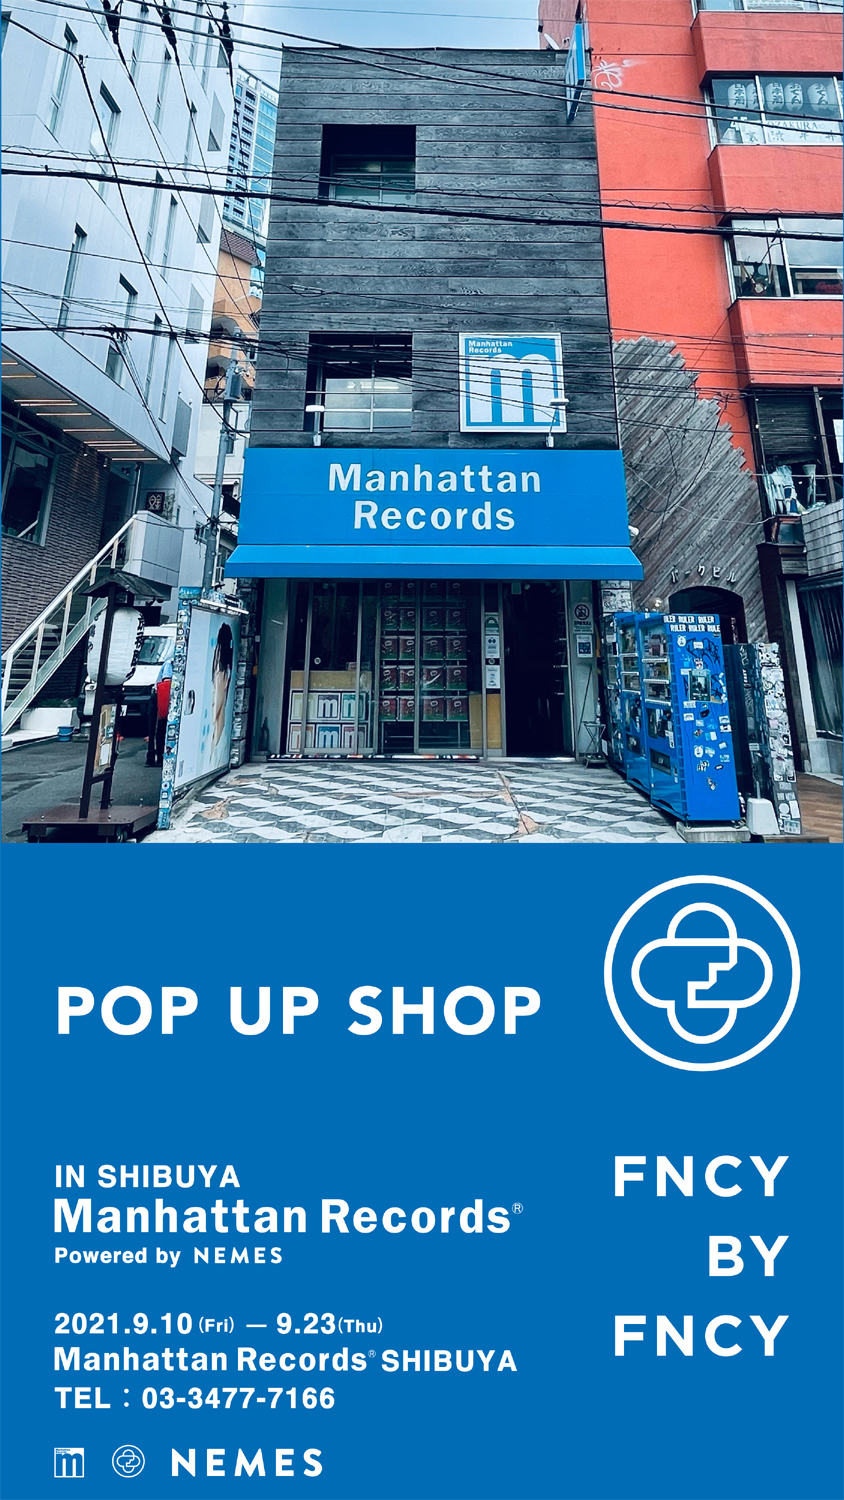 FNCY BY FNCY POP UP SHOP In Manhattan Records®️ Shibuya Store Powered by NEMES